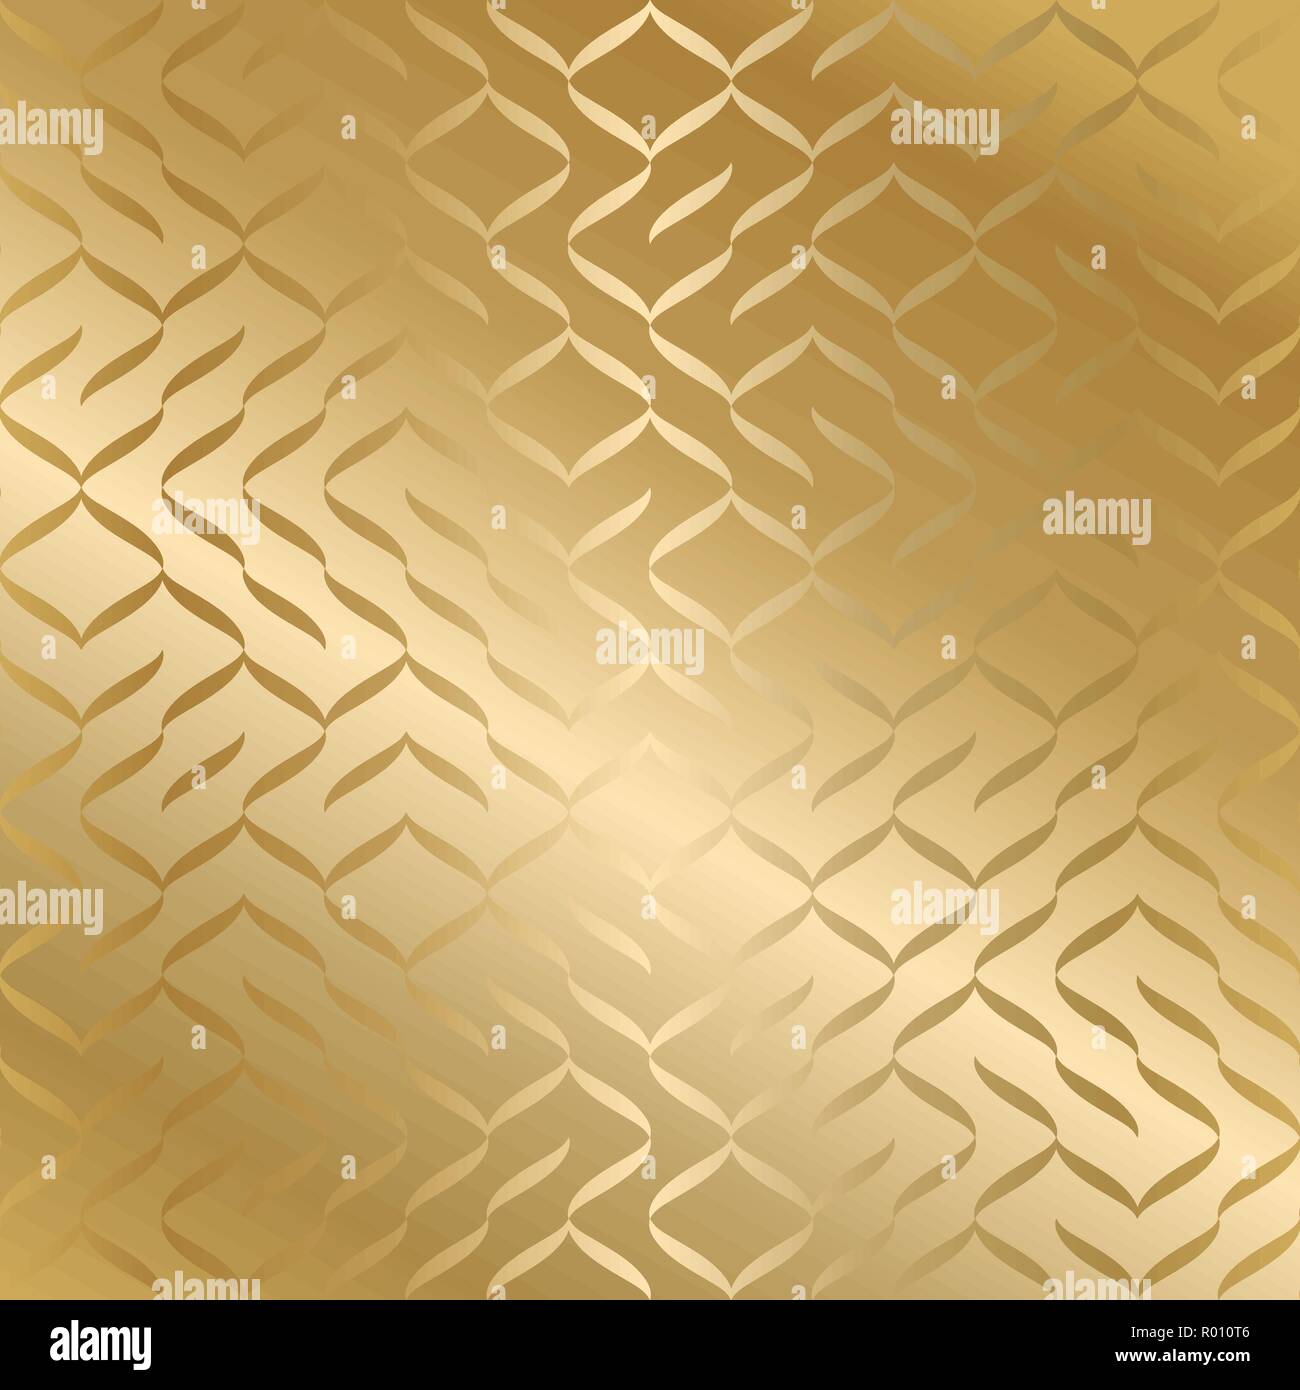 Geometric seamless golden texture. Gold wrapping paper pattern background. Simple luxury graphic print. Vector repeating line modern swatch Stock Vector